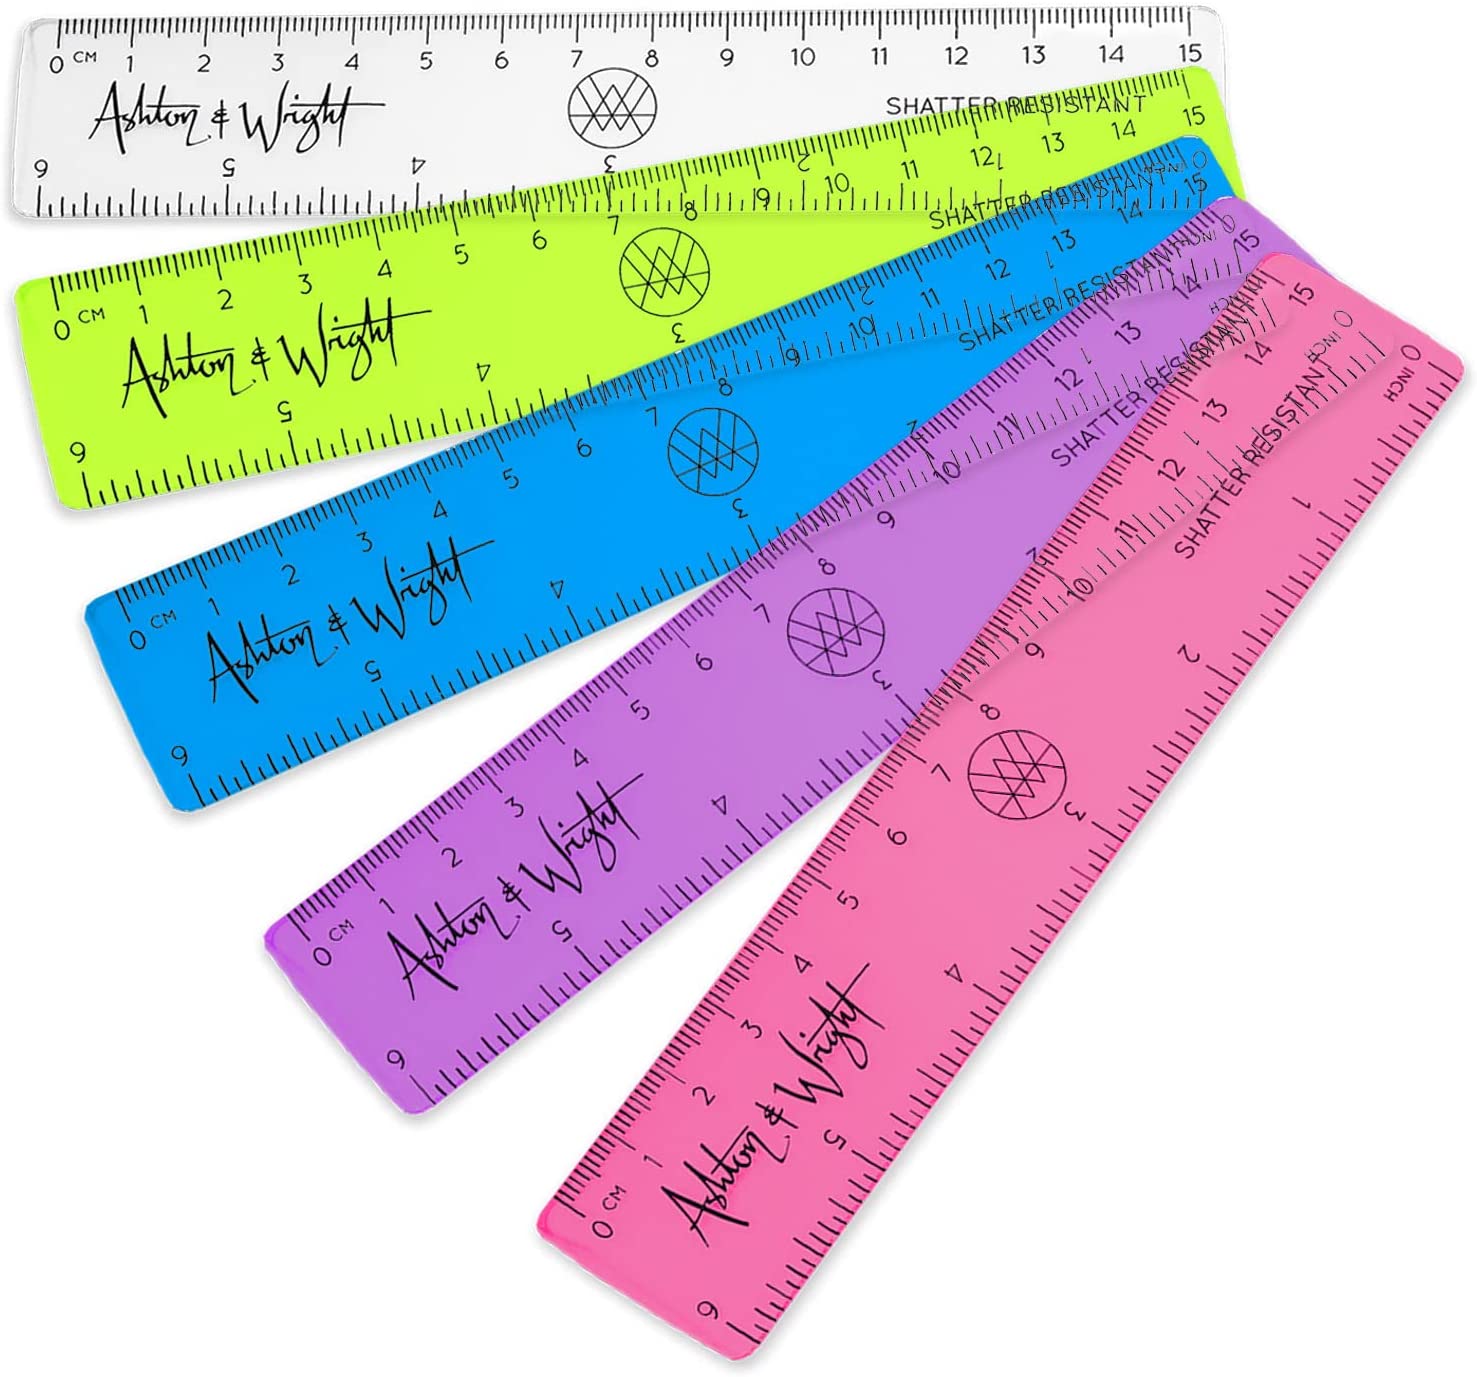 Ashton & Wright 5 Pack Multicoloured Shatter Resistant Rulers RRP £3.99 CLEARANCE XL £2.99